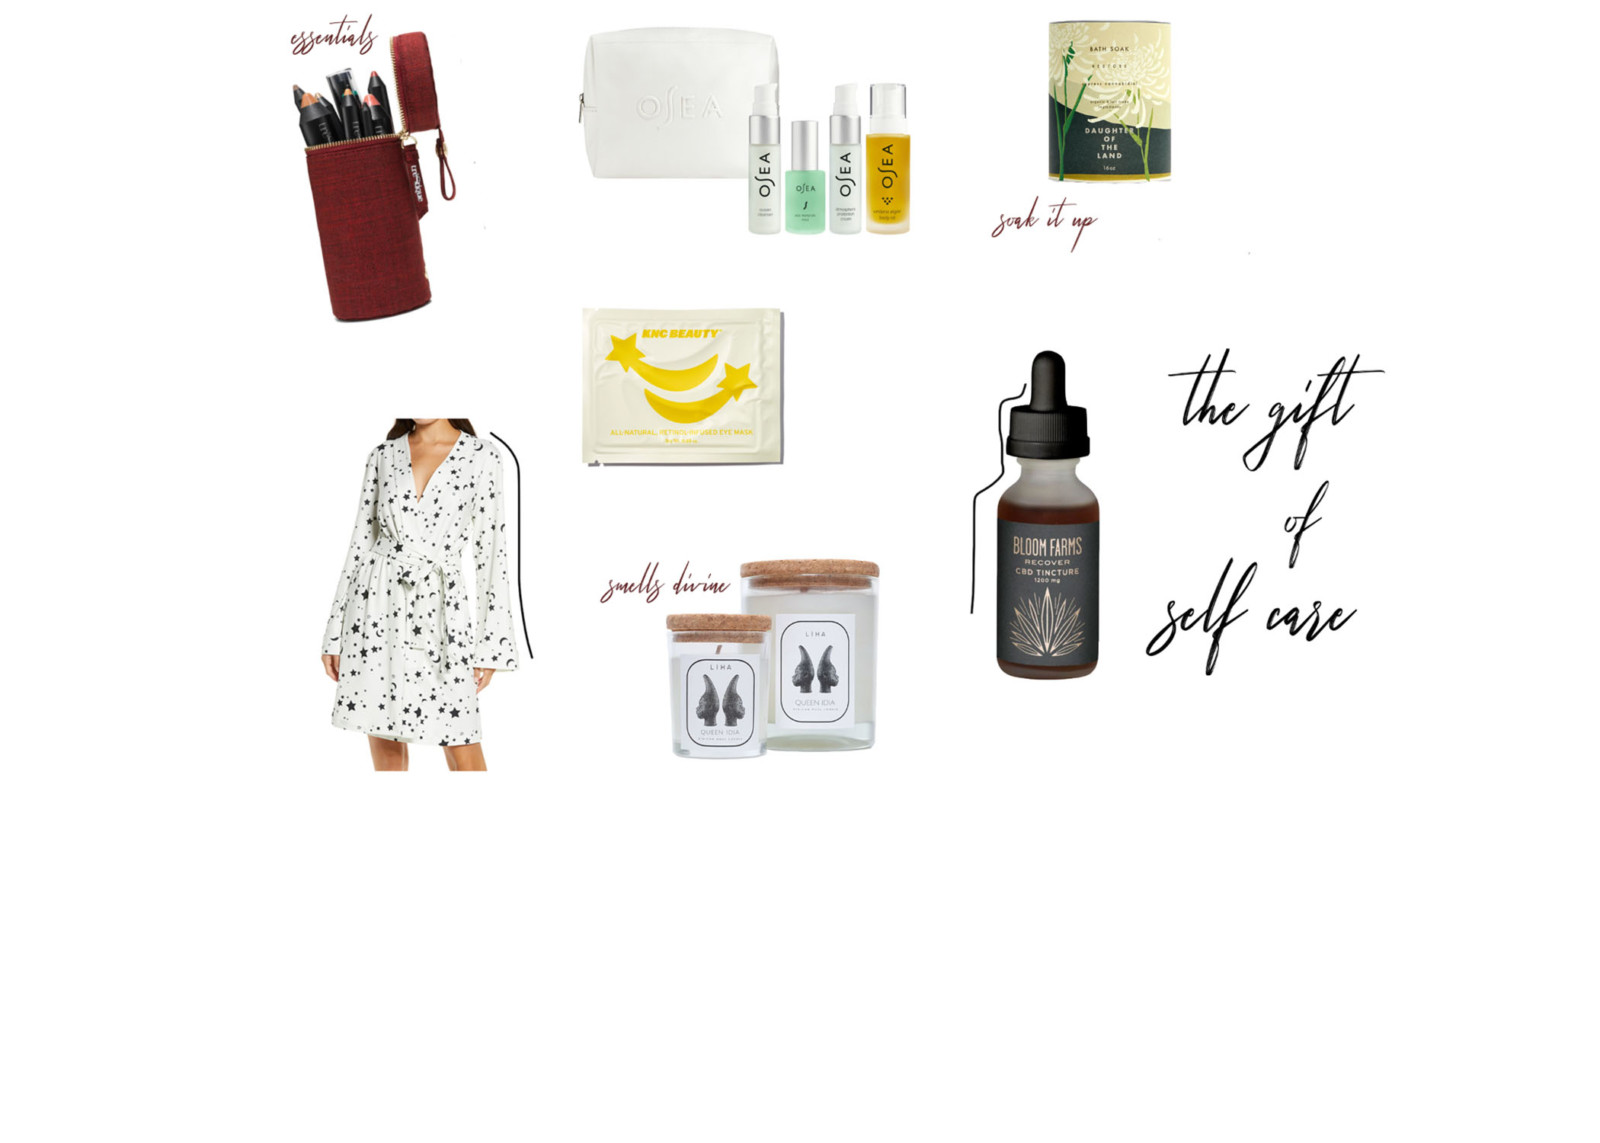 2020 Gift Guides Start Here – Self Care